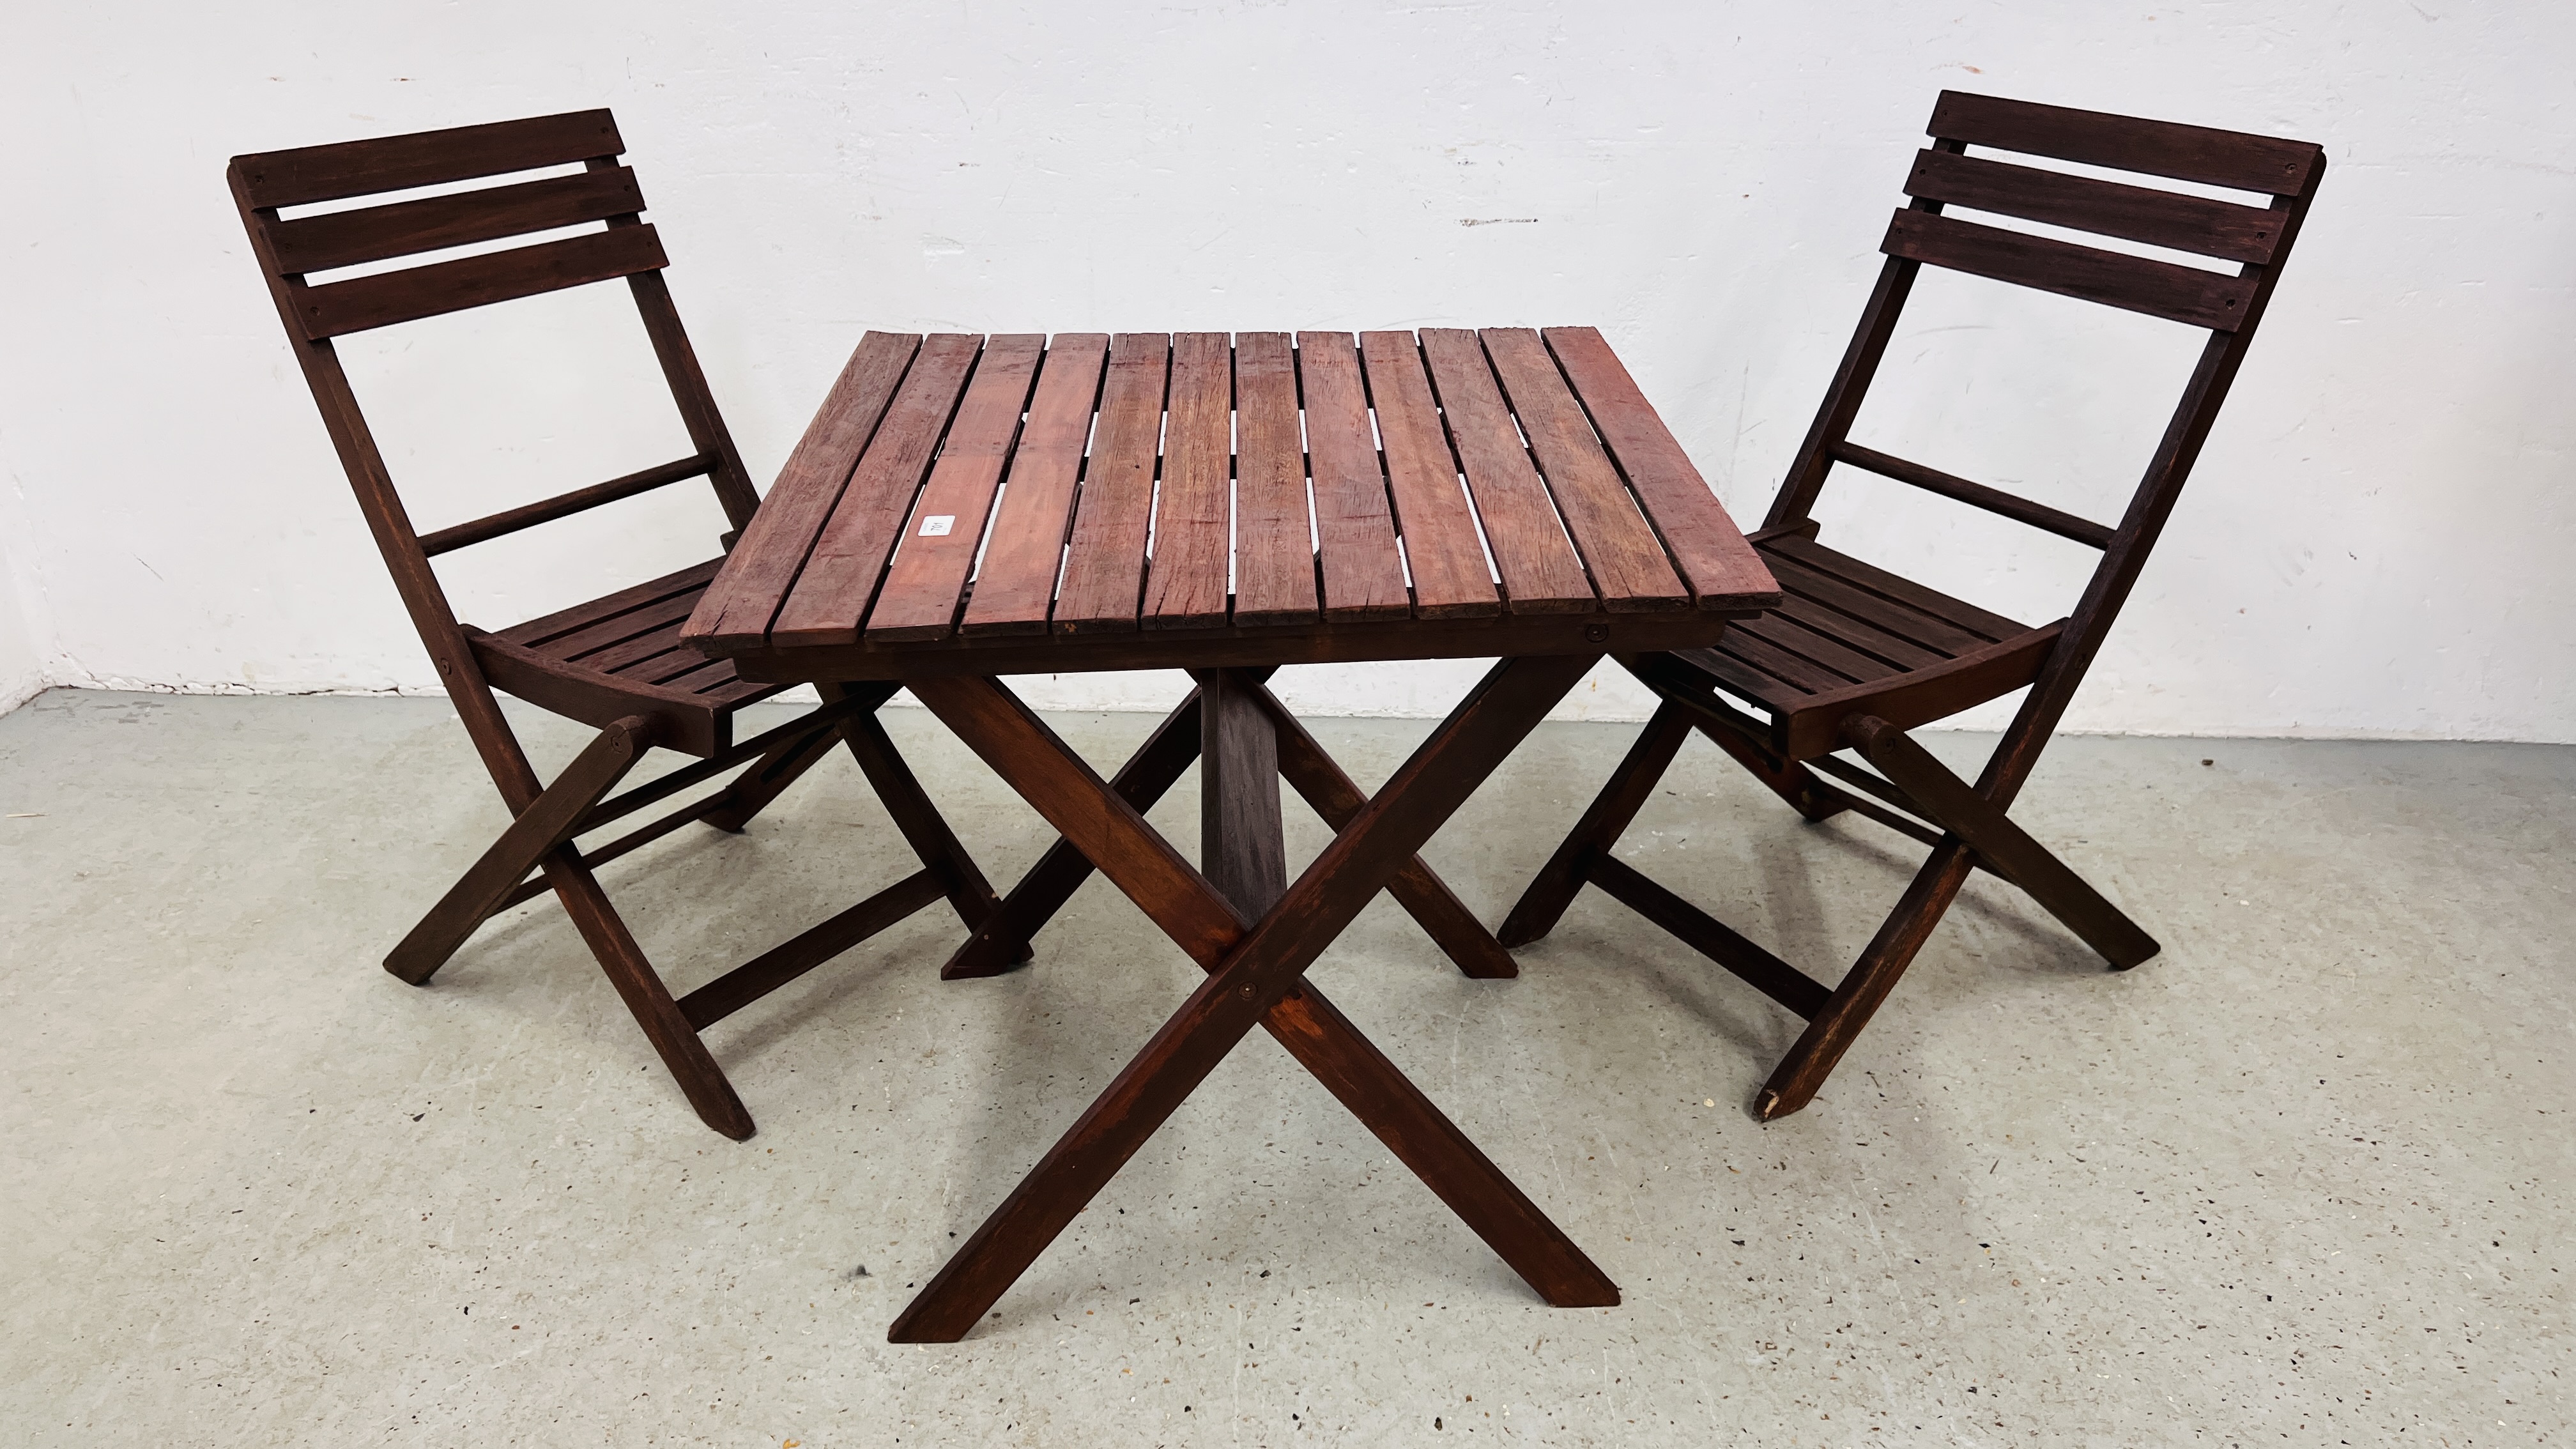 A GARDEN BISTRO TABLE AND 2 CHAIRS.